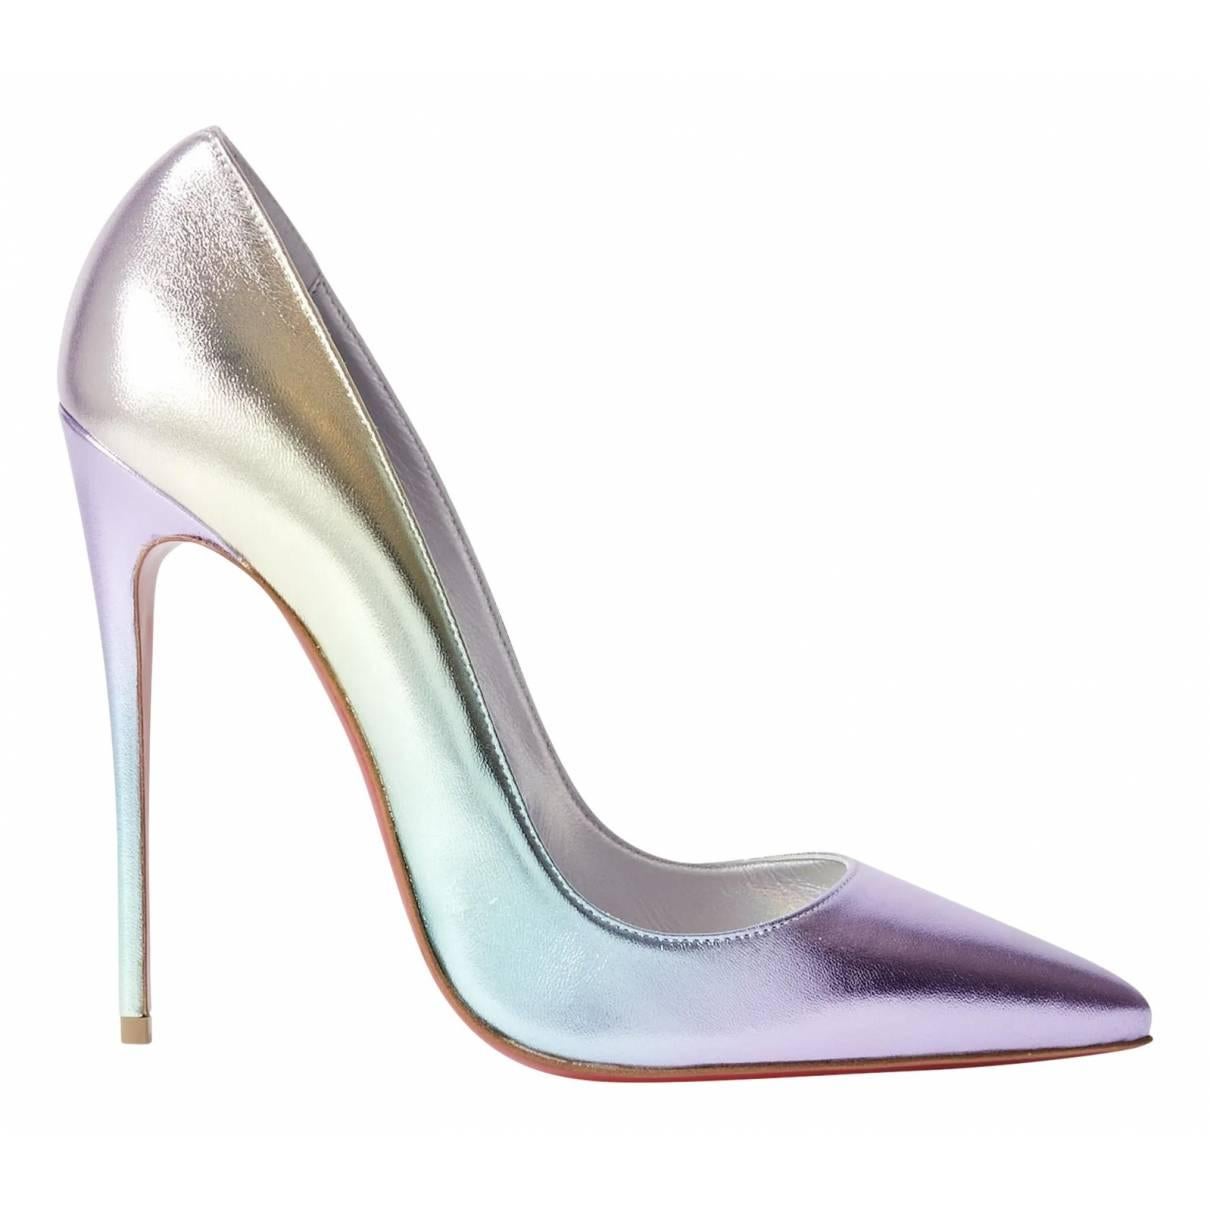 Christian Louboutin updates the iconic So Kate pumps in iridescent nappa leather. They feature pointed toes, 120mm stiletto heels, and the brand's trademarked lipstick-red soles.